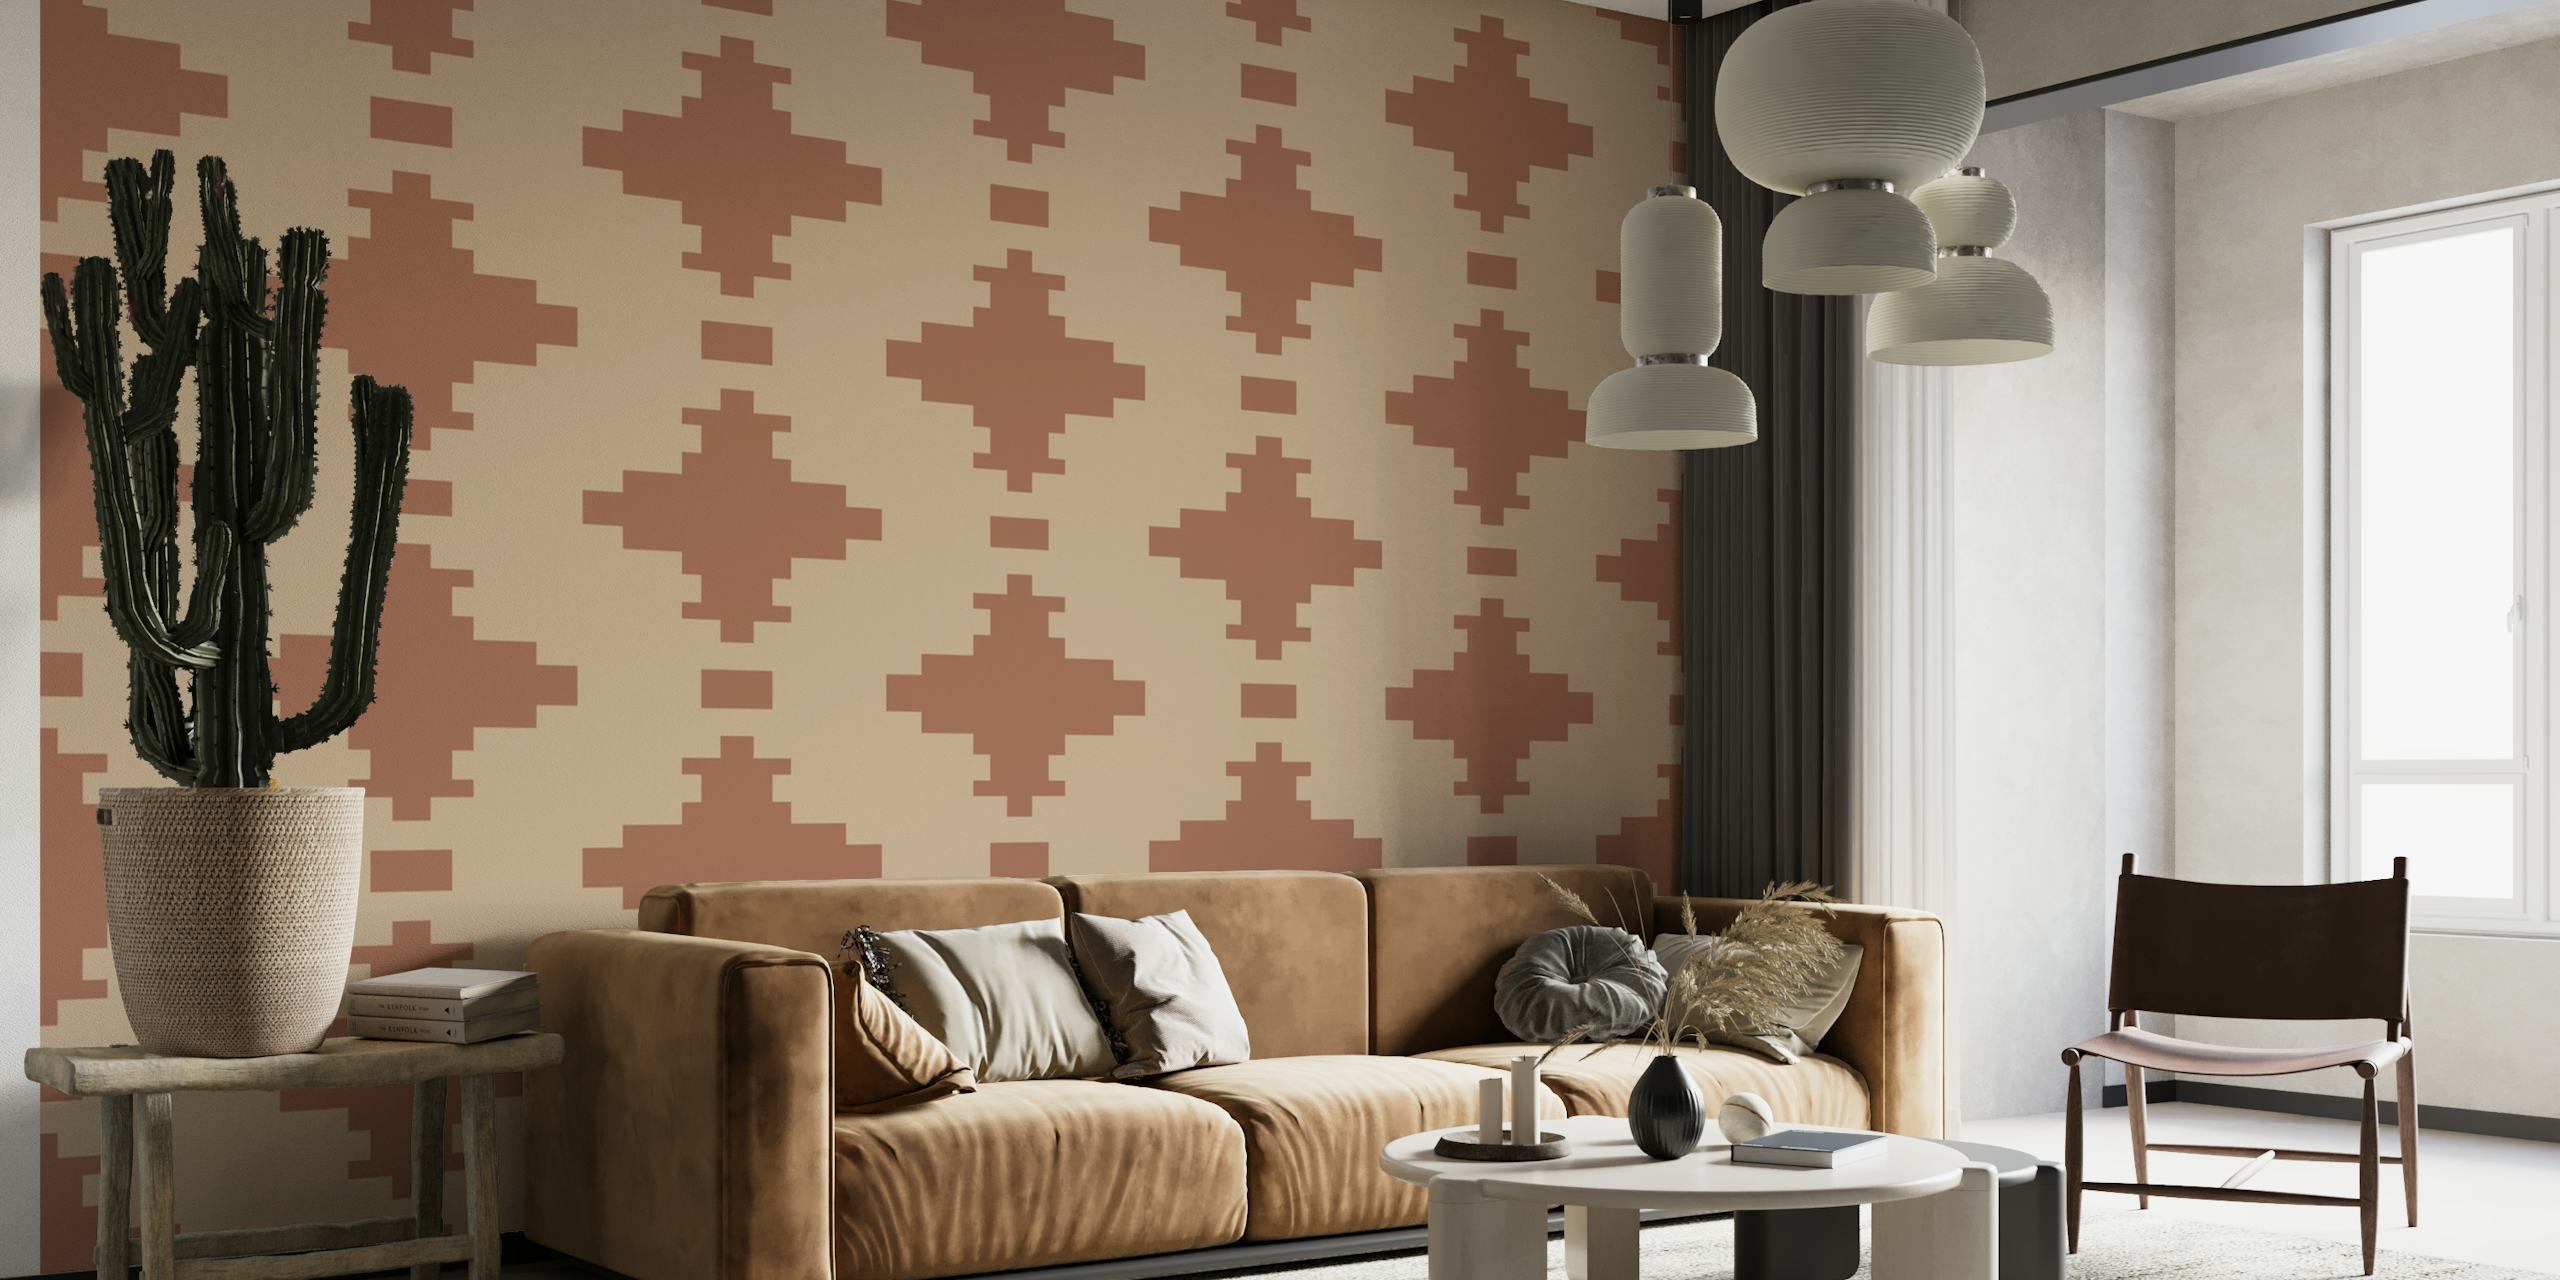 Urban tribal patterned mural in beige and brown